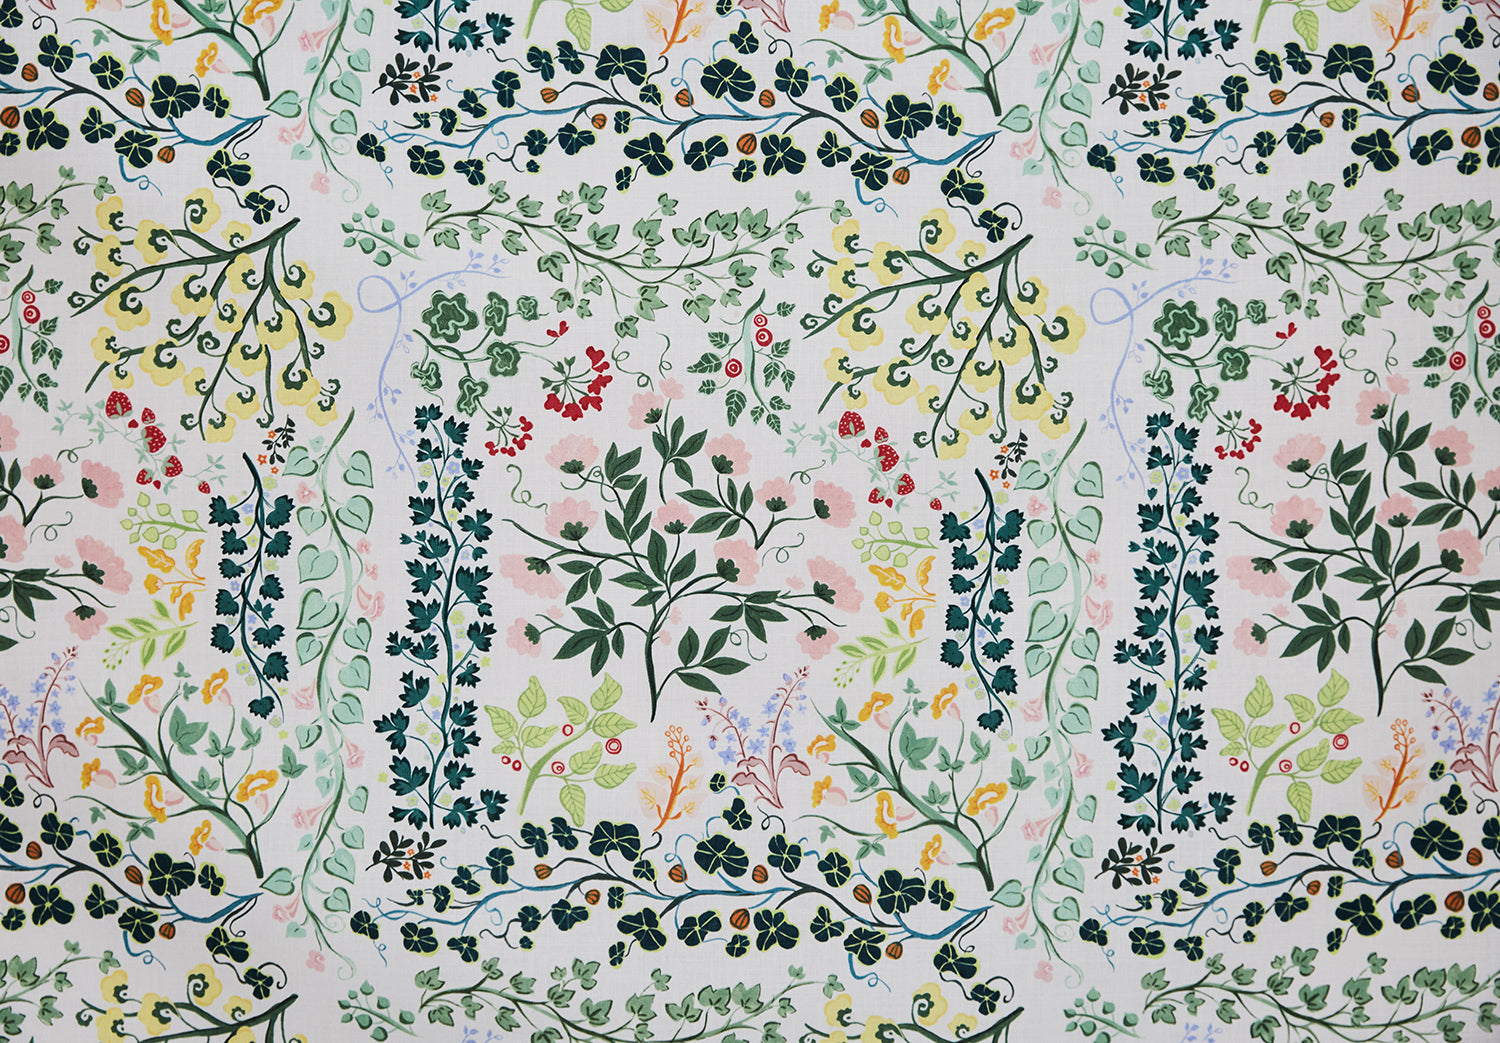 Detail of fabric in a dense floral print in shades of pink, yellow, green and black on a white field.